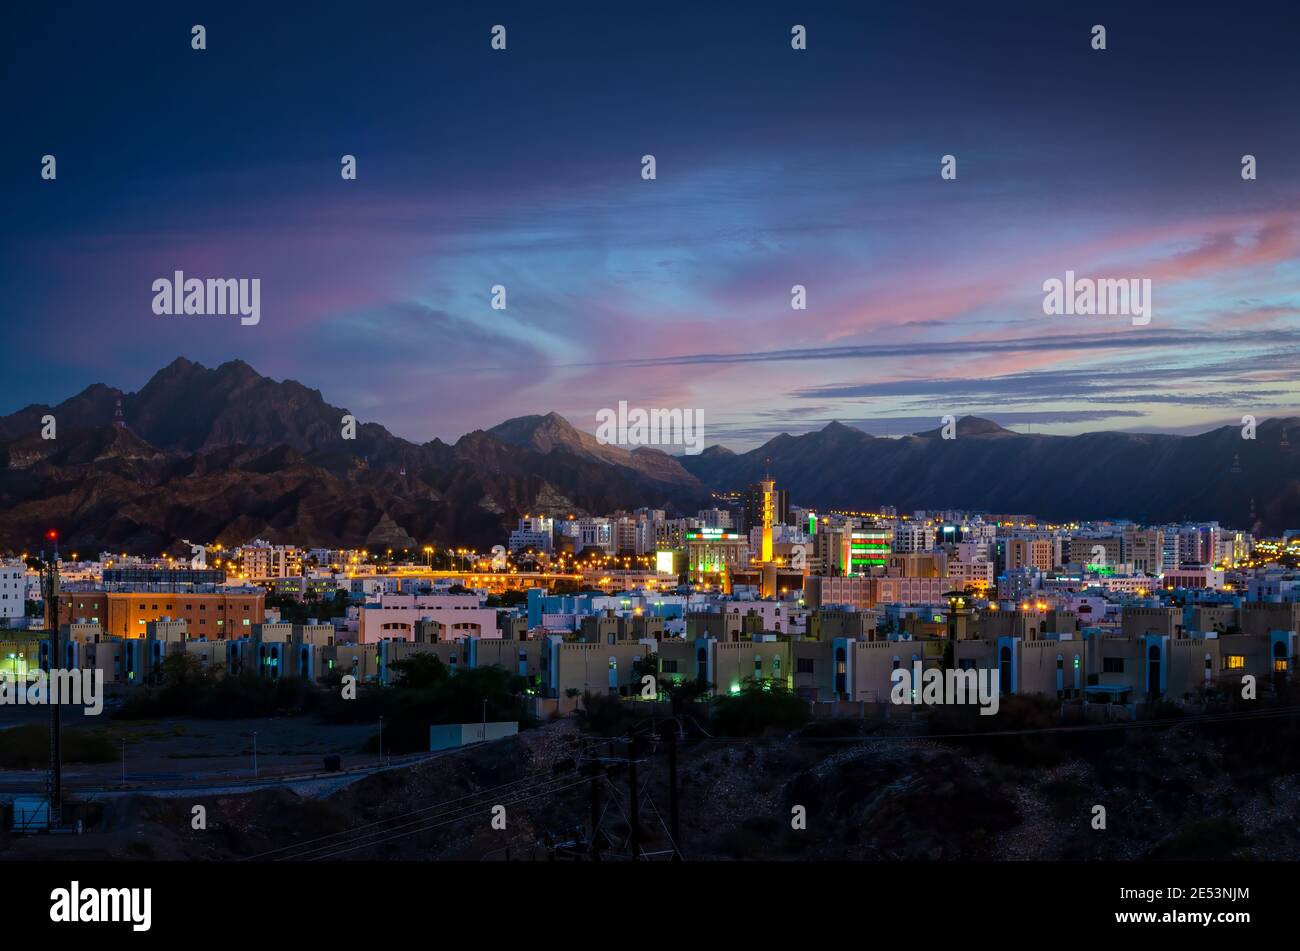 Illuminated buildings during an evening in Muscat, Oman with beautiful sky in the background Stock Photo